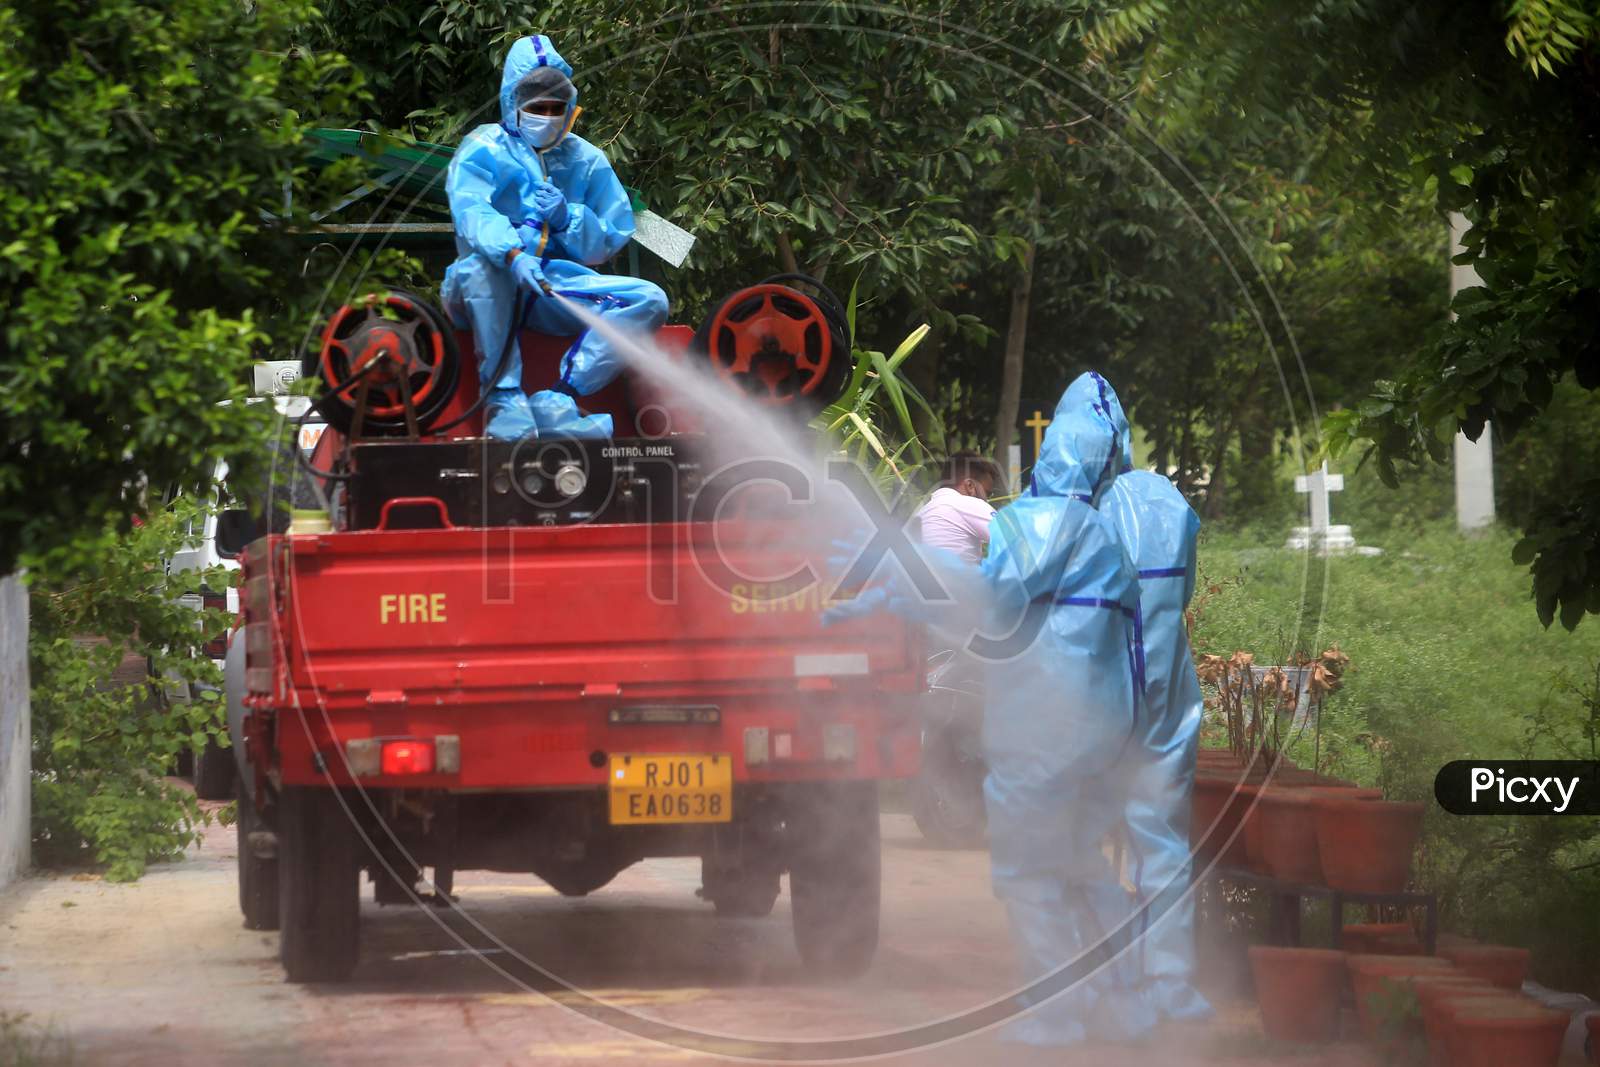 A municipal worker sprays disinfectant on his colleague after they cremated a person who died of coronavirus infection in Ajmer, Rajasthan on July 12, 2020